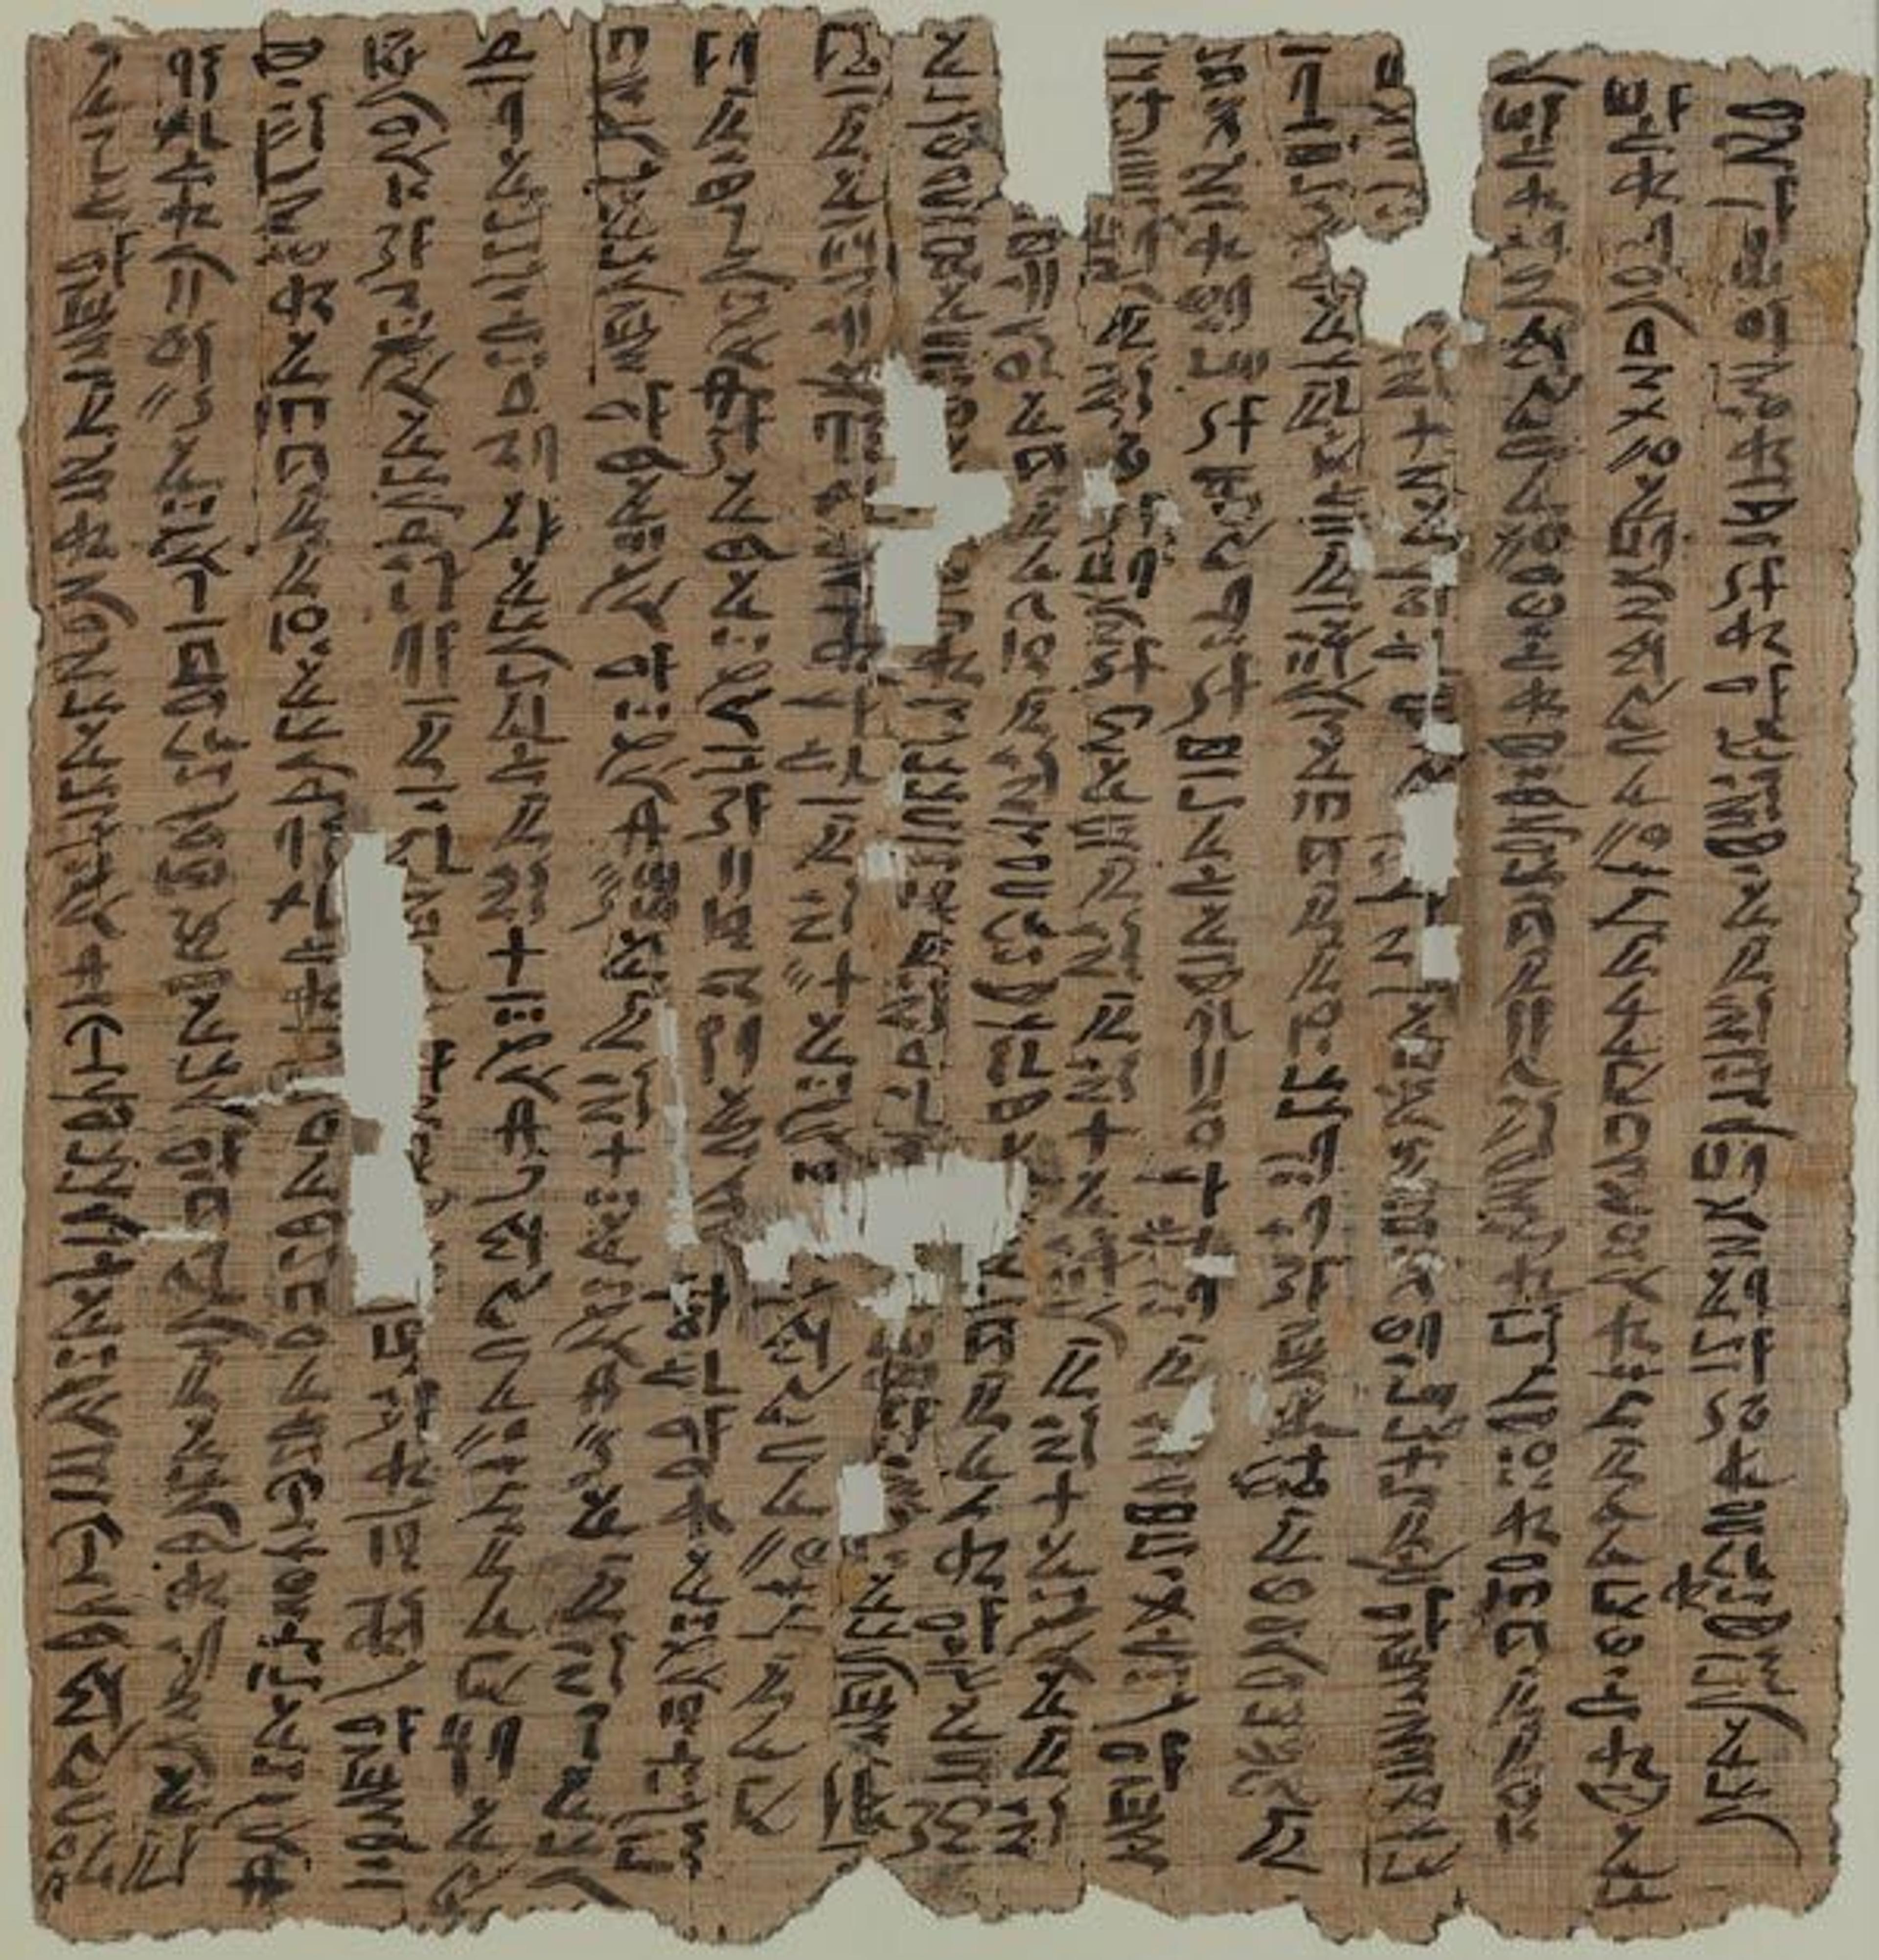 Heqanakht Letter I. Middle Kingdom, Dynasty 12, reign of Senwosret I (ca. 1961–1917 B.C.). Papyrus, ink; H. 28.4 cm (11 3/16 in.), W. 27.1 cm (10 11/16 in.). The Metropolitan Museum of Art, New York, Rogers Fund and Edward S. Harkness Gift, 1922 (22.3.516)